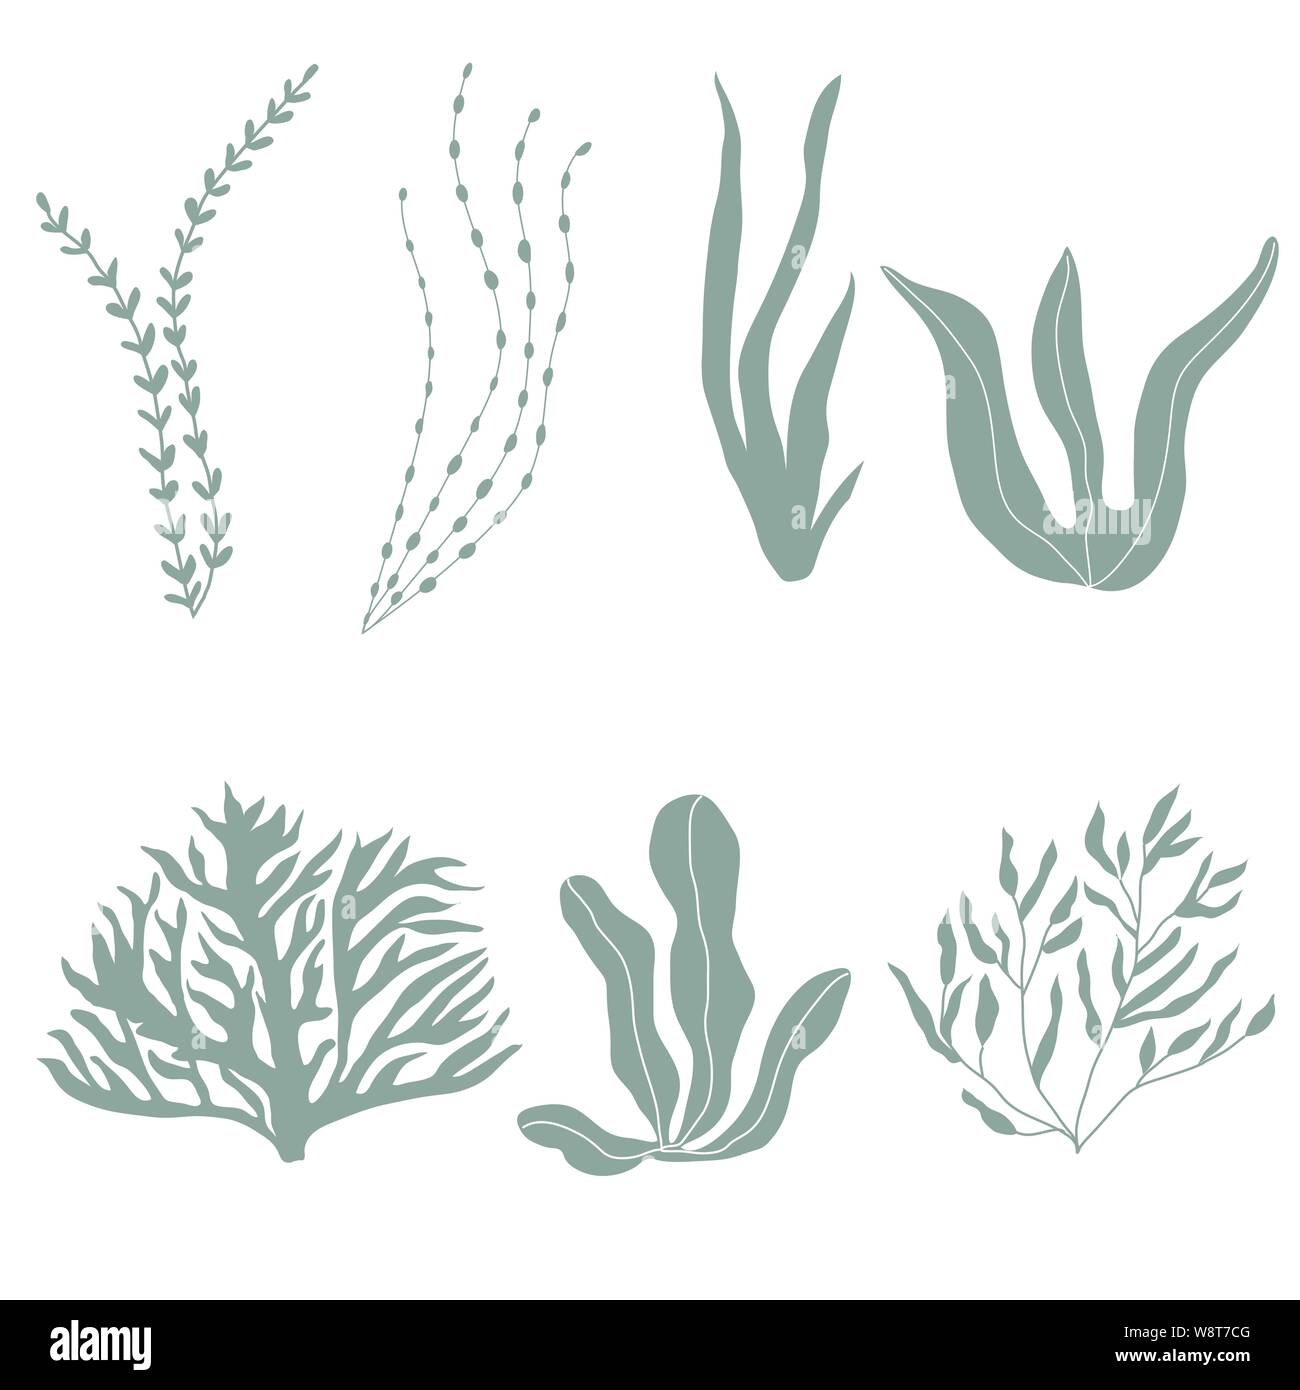 Collection of underwater seaplants and corals, set with marine plants for fabric, textile, wallpaper, nursery decor, prints, childish background. Vect Stock Vector